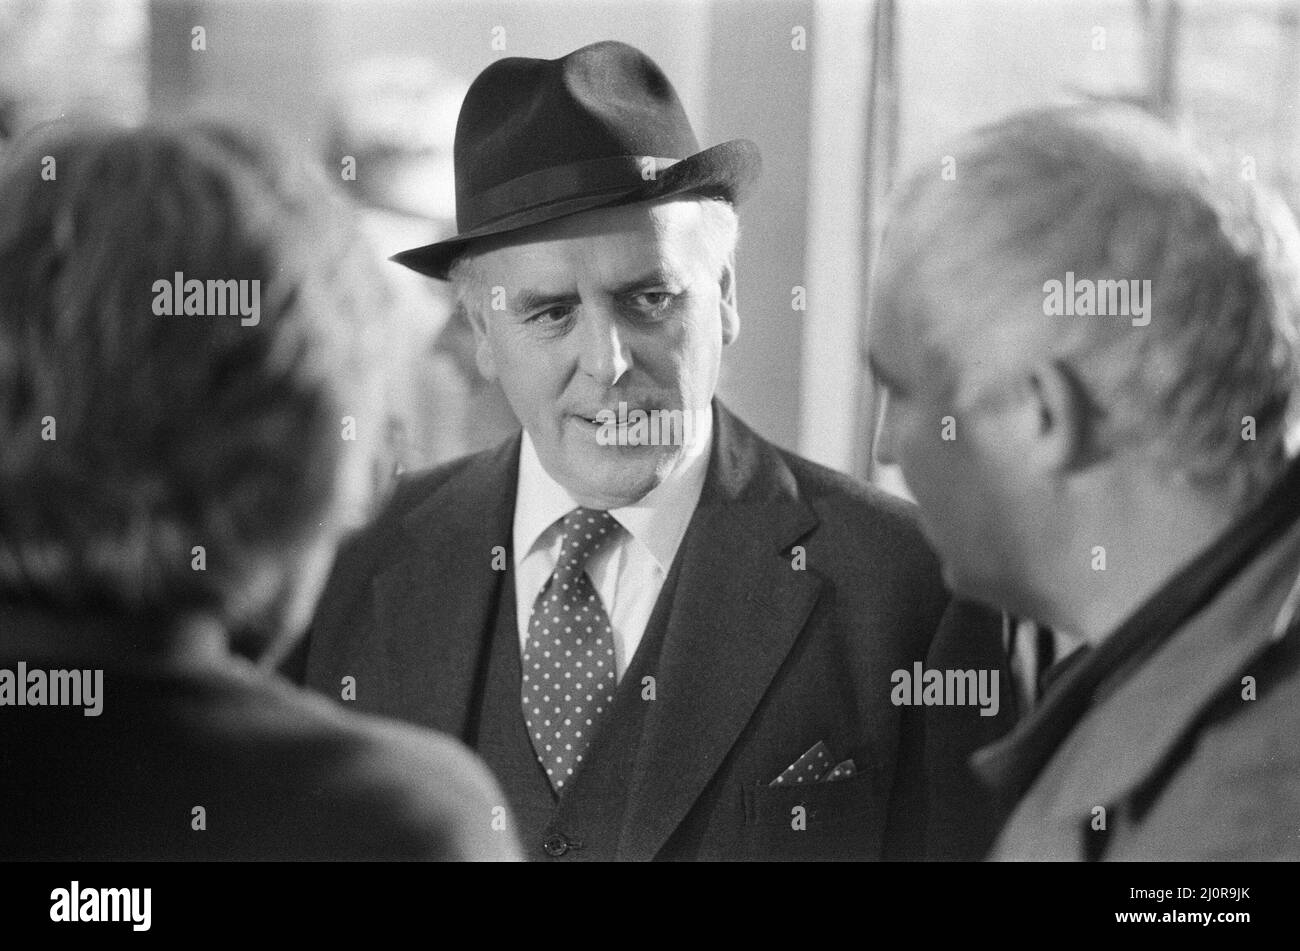 Behind the scenes filming of Minder, a British comedy drama TV Series set in the London criminal underworld, fourth series, episode 'A Star is Gorn', pictured Thursday 22nd September 1983. Our Picture Shows ... George Cole as Arthur Daley. Stock Photo